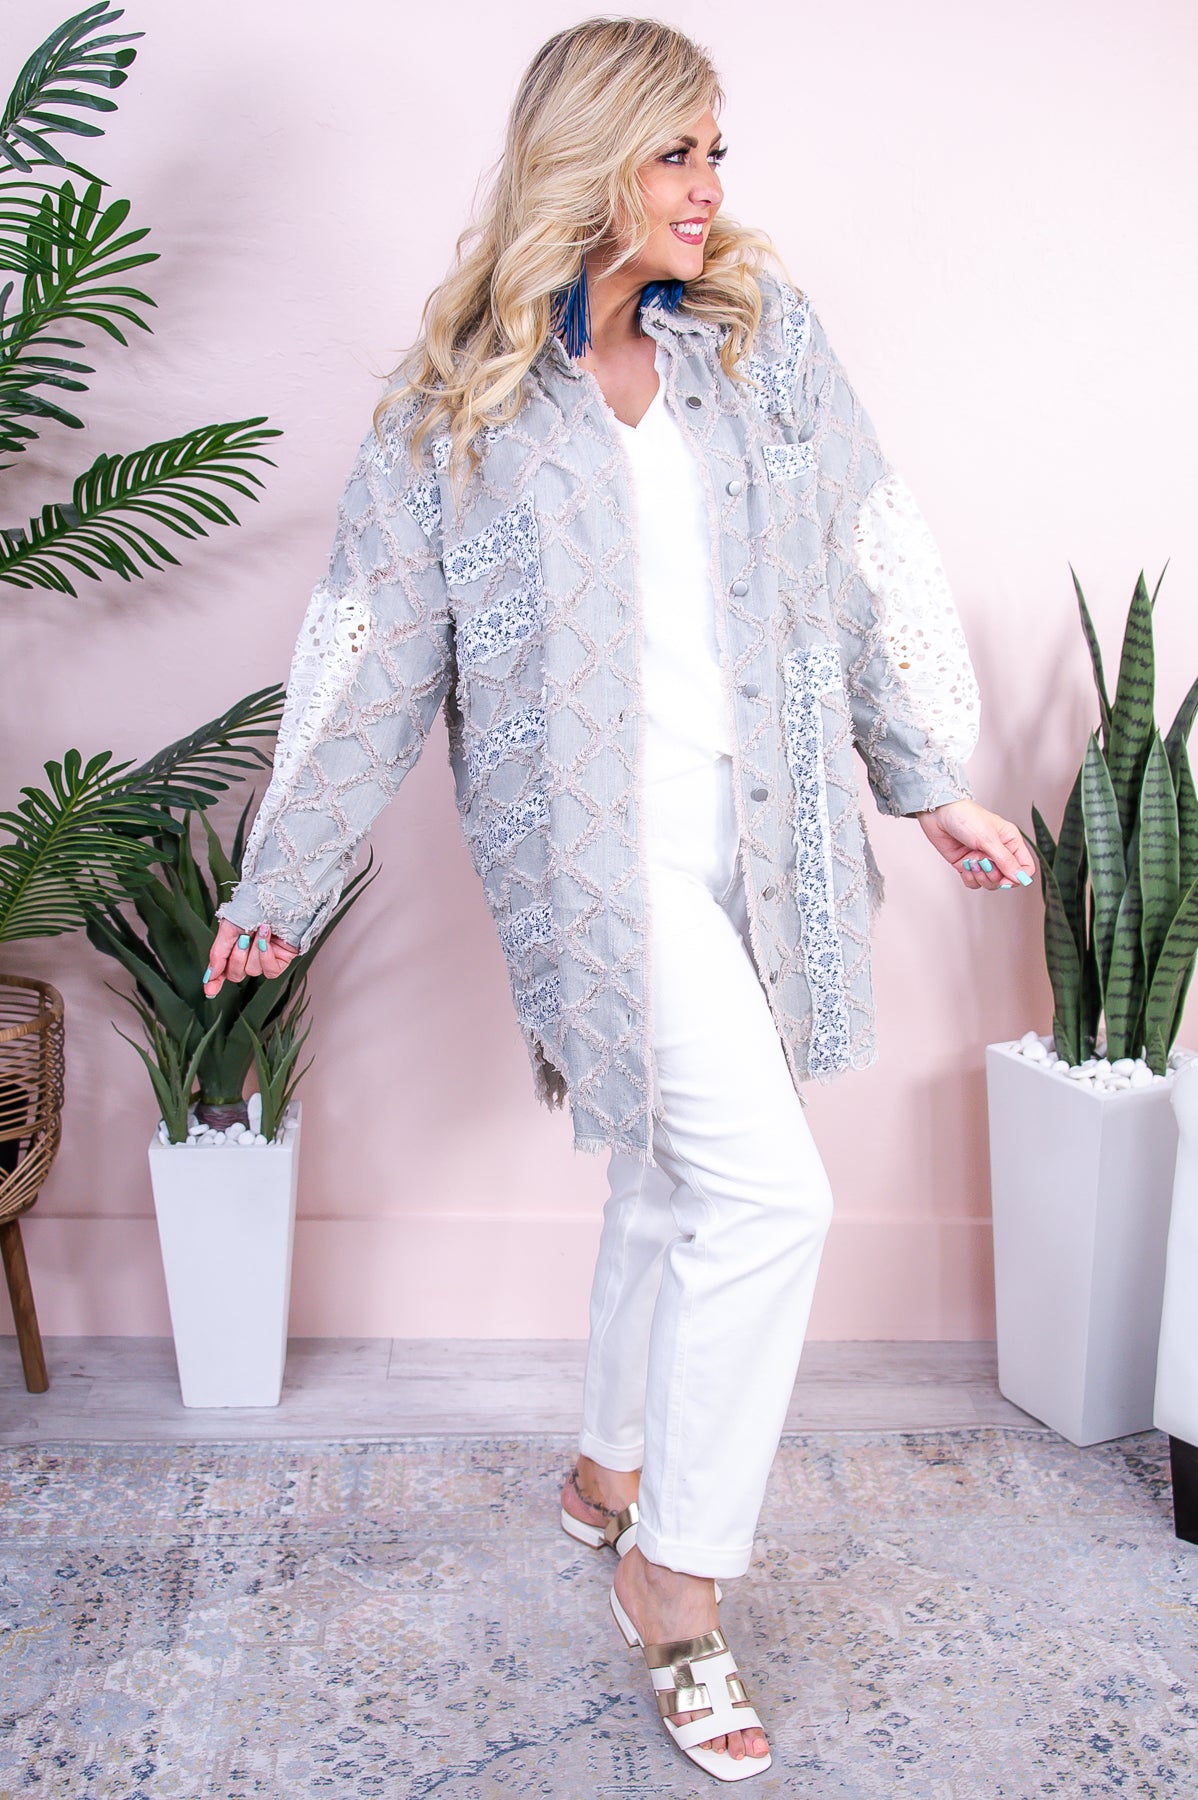 Essential Chicness White/Light Denim Distressed/Frayed Floral Jacket - O5434WH